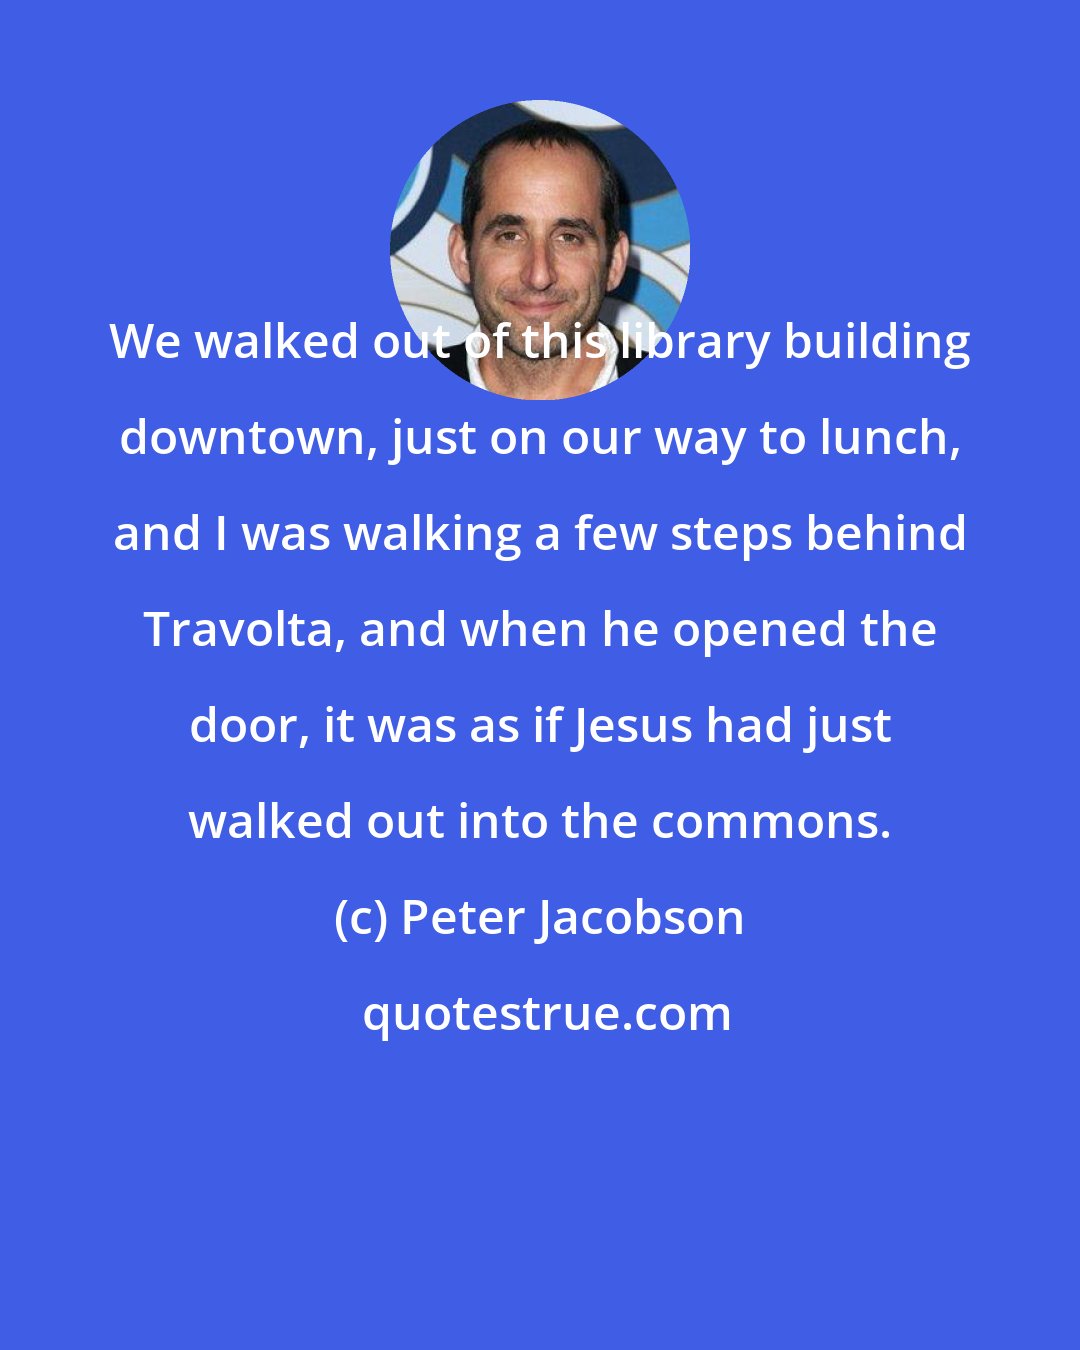 Peter Jacobson: We walked out of this library building downtown, just on our way to lunch, and I was walking a few steps behind Travolta, and when he opened the door, it was as if Jesus had just walked out into the commons.